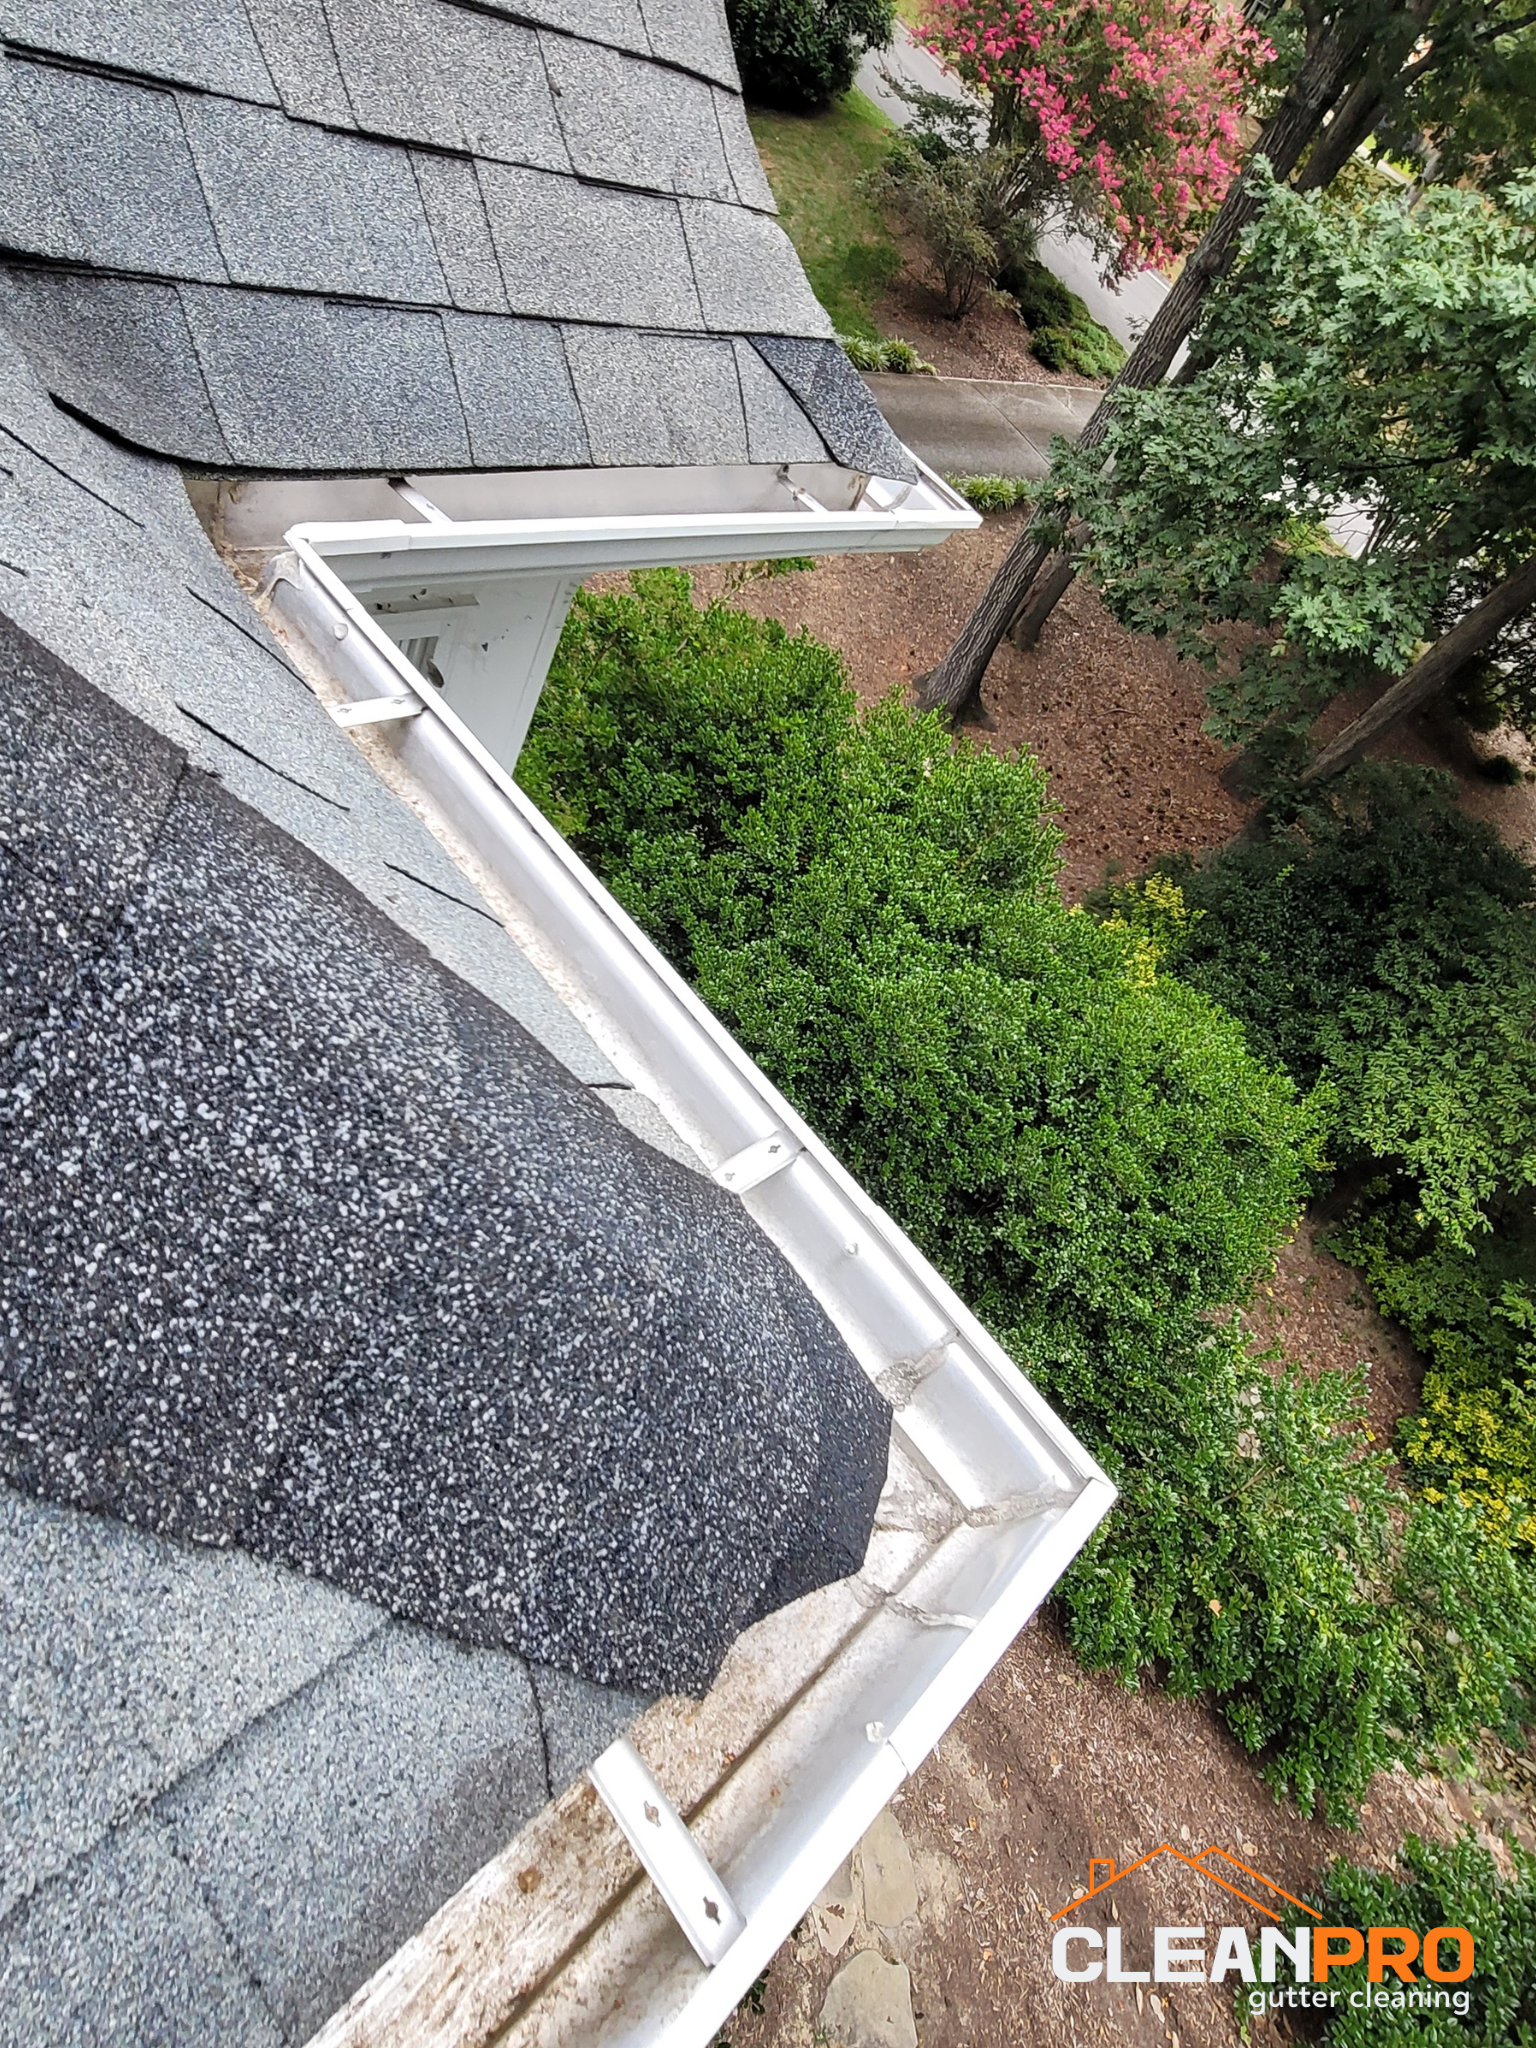 Best Gutter Cleaning Service in Colorado Springs